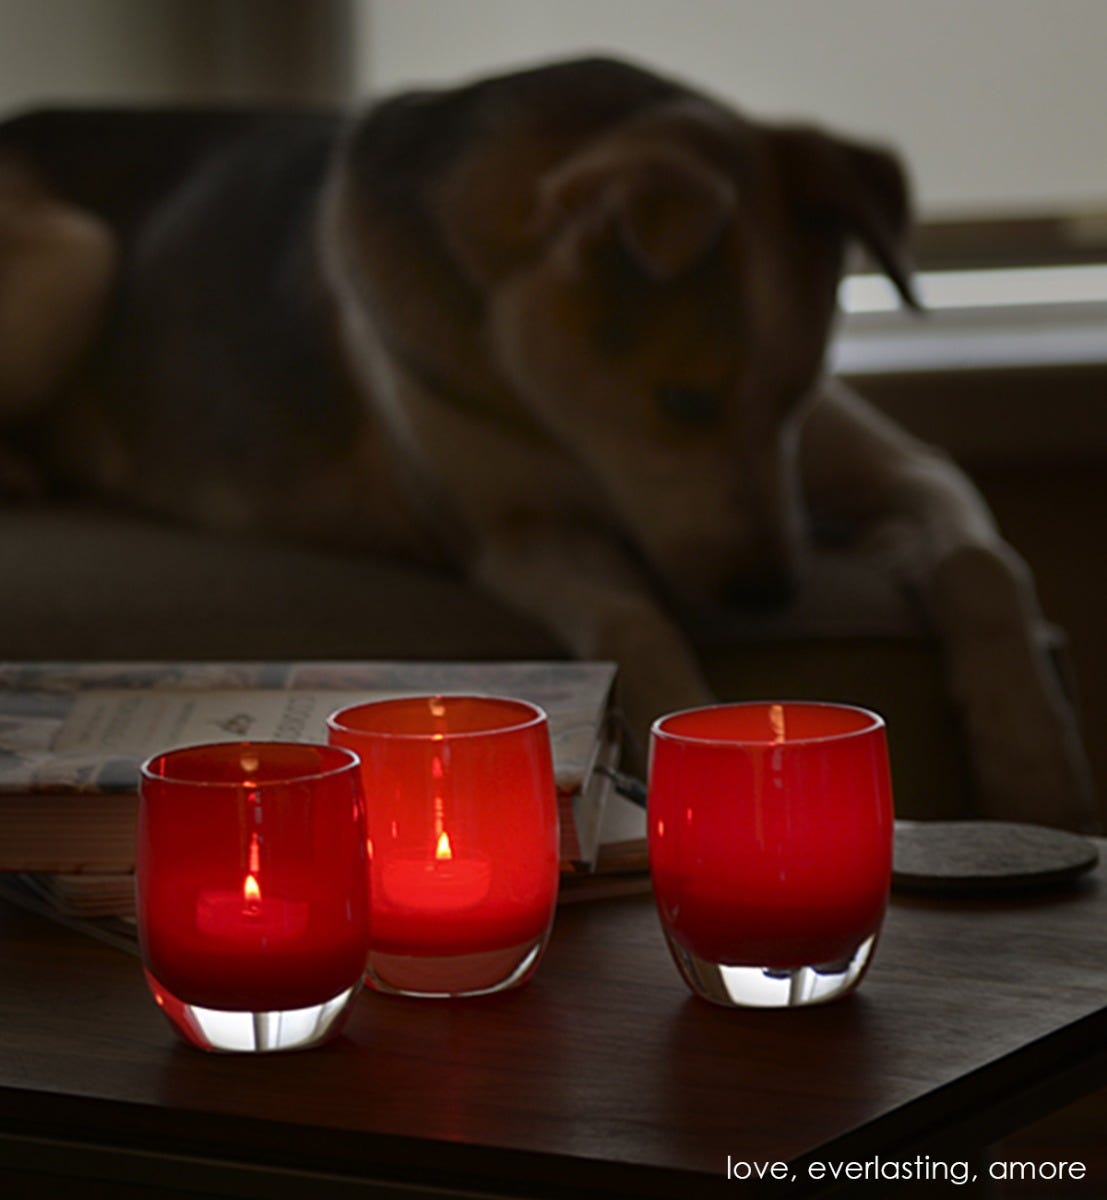 amore opaque red hand-blown glass votive candle holder. Paired with everlasting and love.